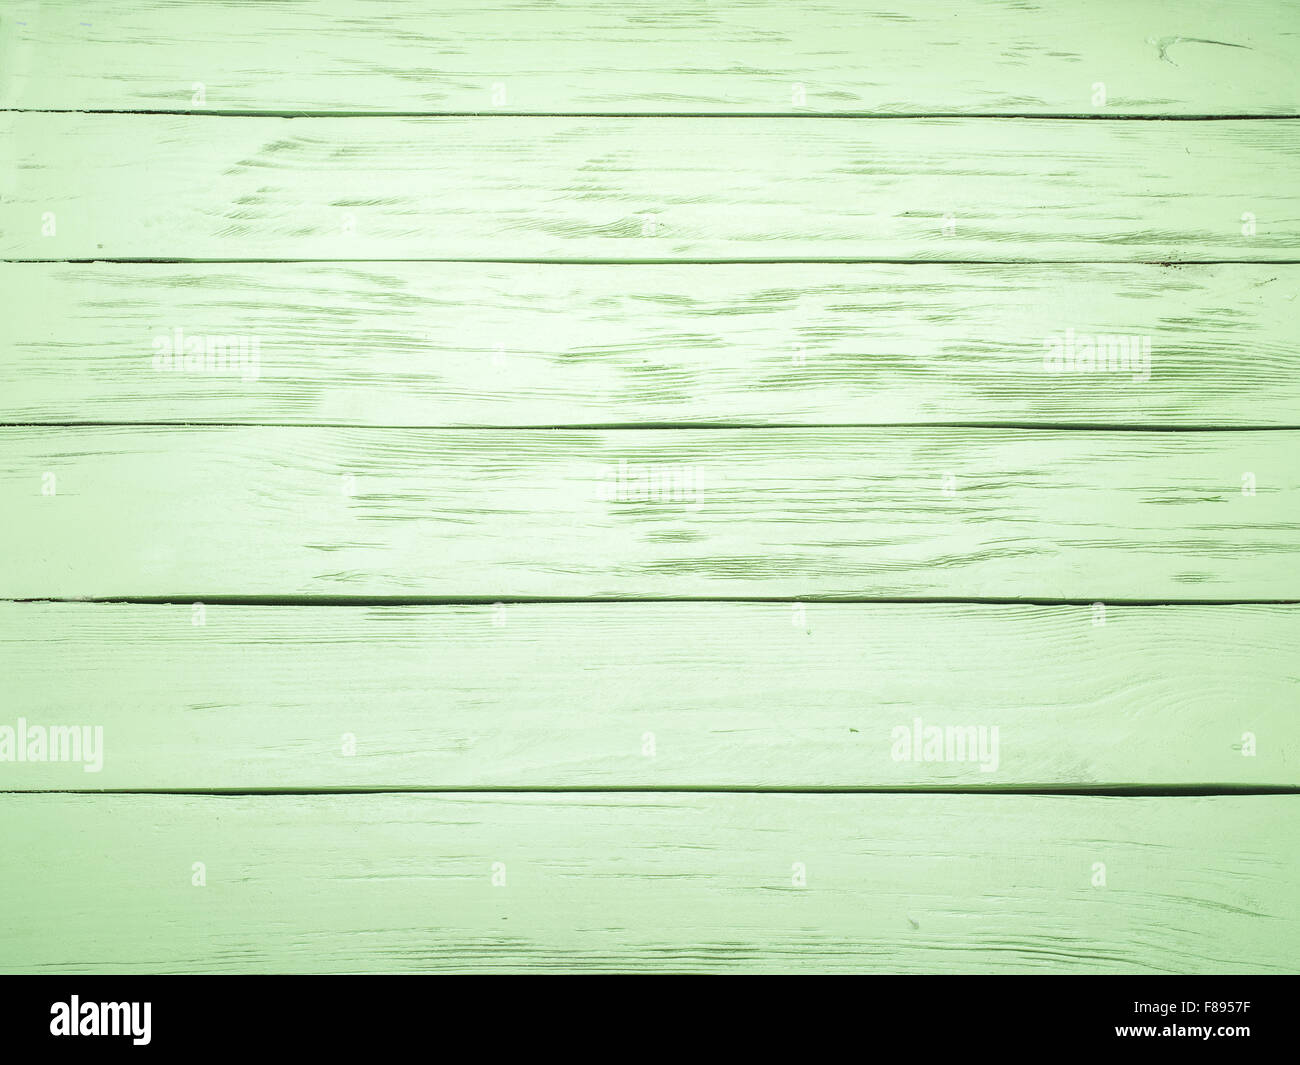 Wooden background painted in light green color. Stock Photo